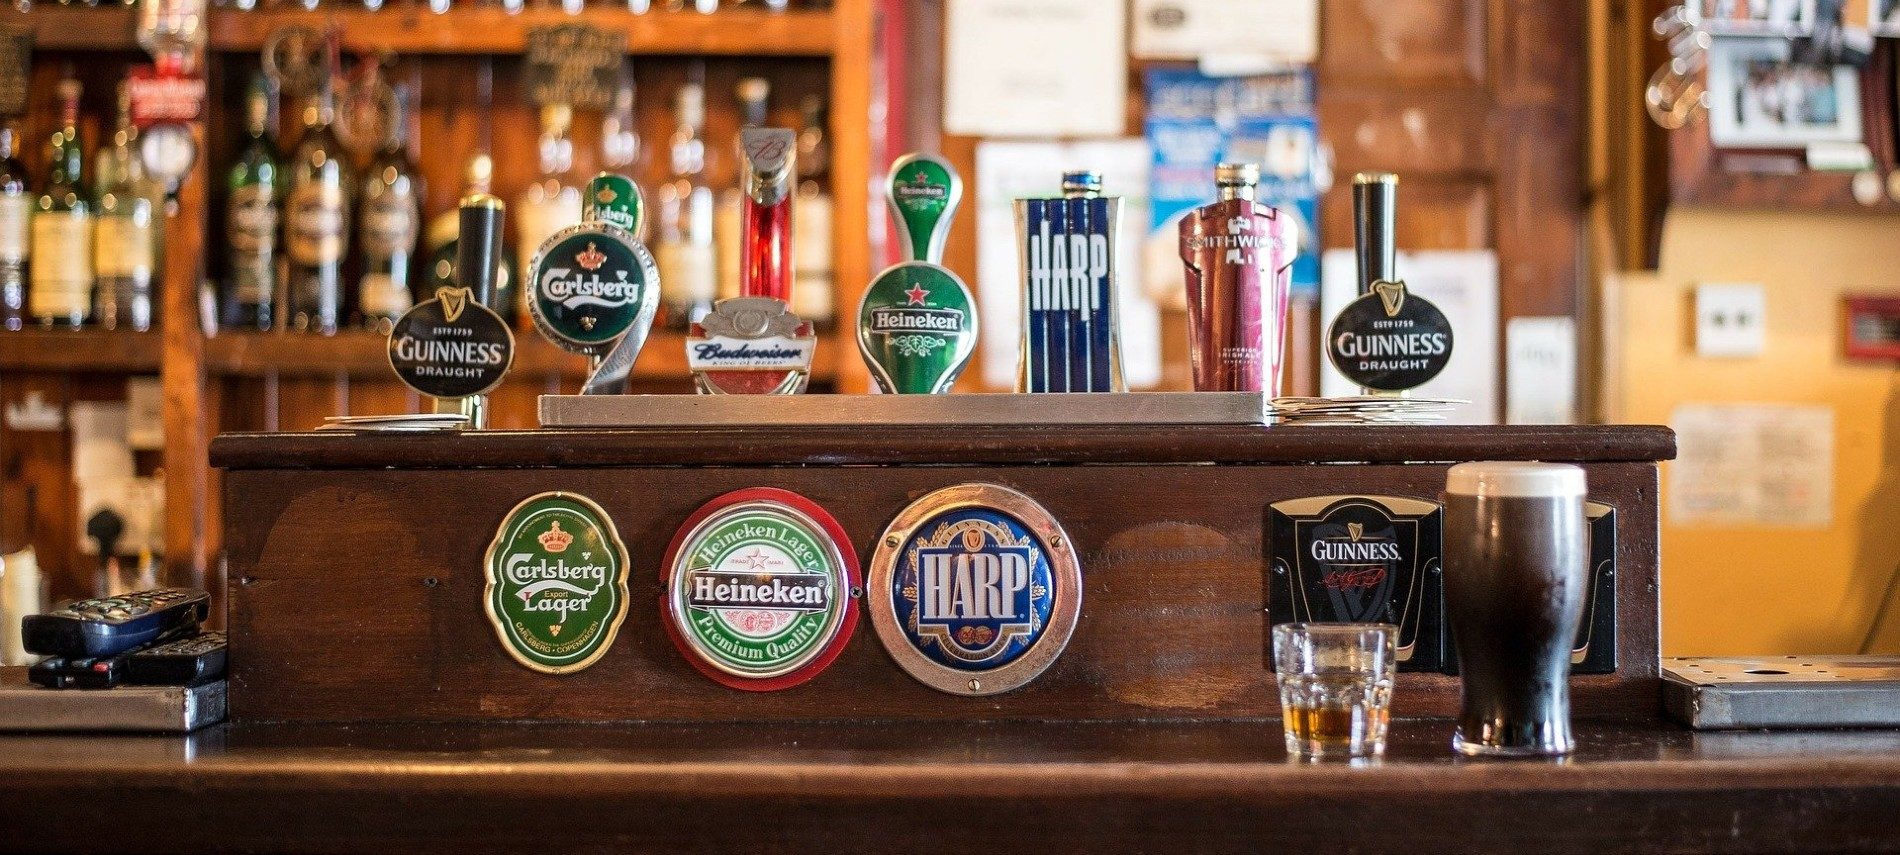 Inside of a pub showing a bar counter with seven different beers on tap and a couple glasses of beer on the table